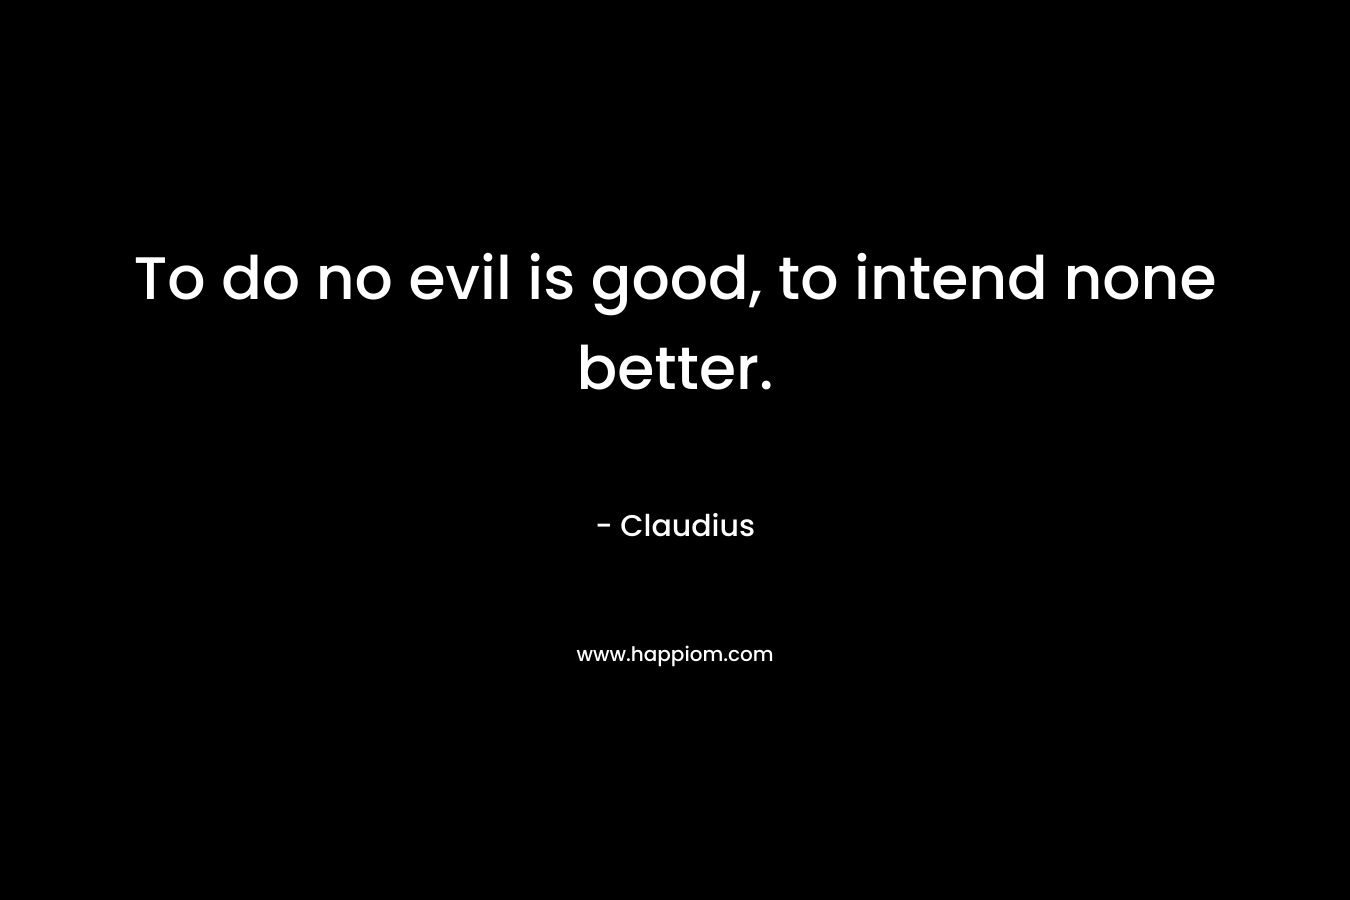 To do no evil is good, to intend none better. – Claudius